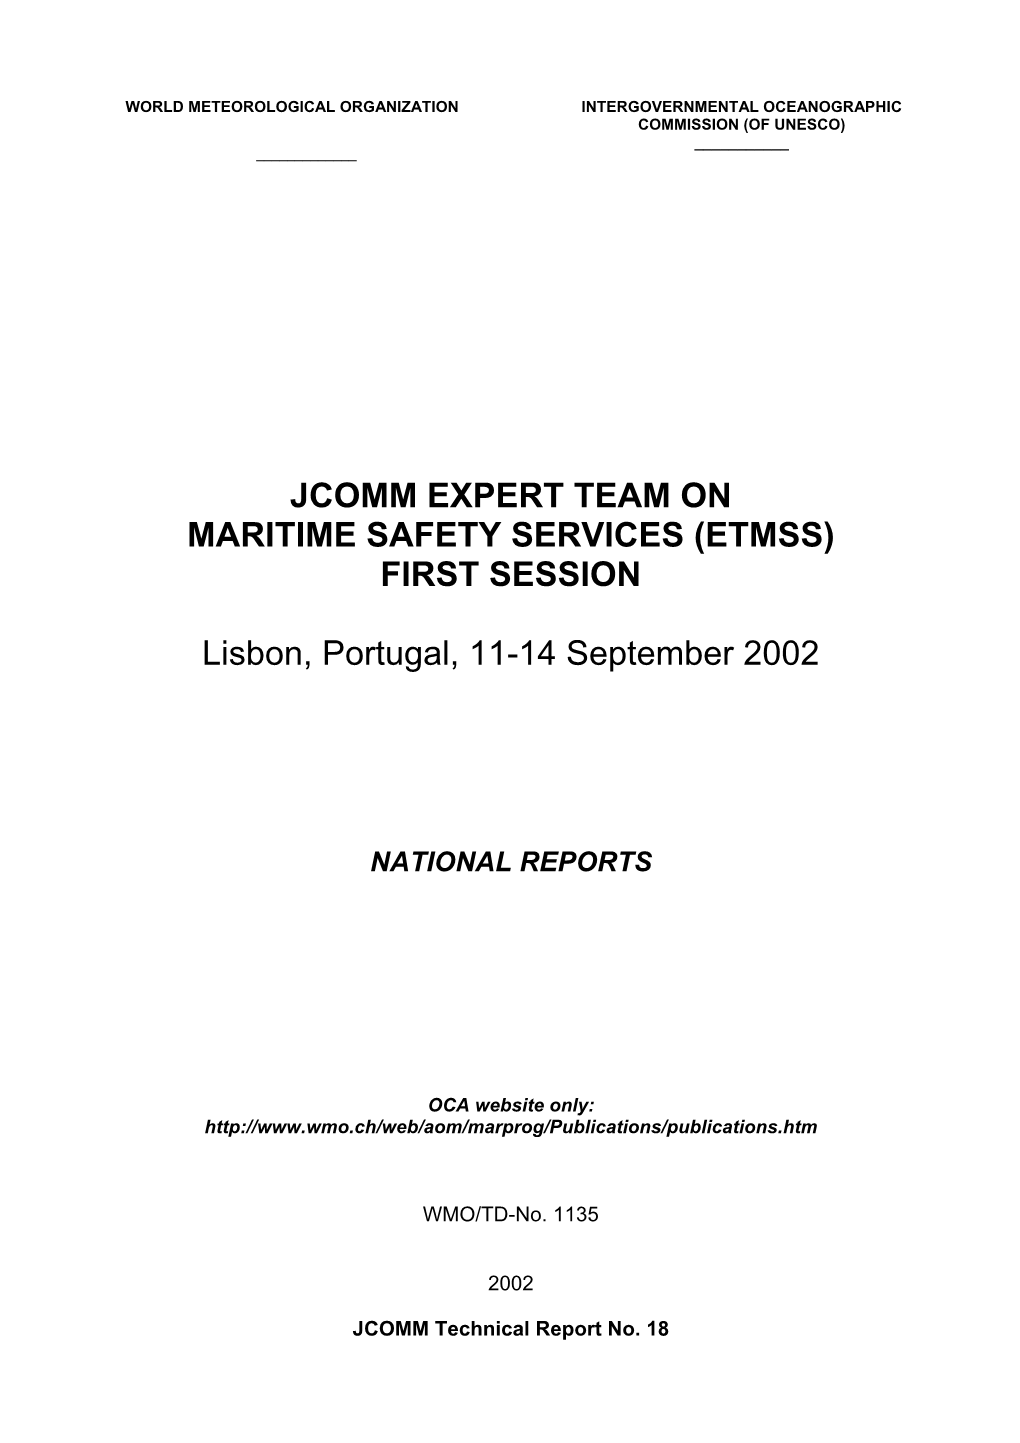 JCOMM EXPERT TEAM on MARITIME SAFETY SERVICES (ETMSS) FIRST SESSION Lisbon, Portugal, 11-14 September 2002